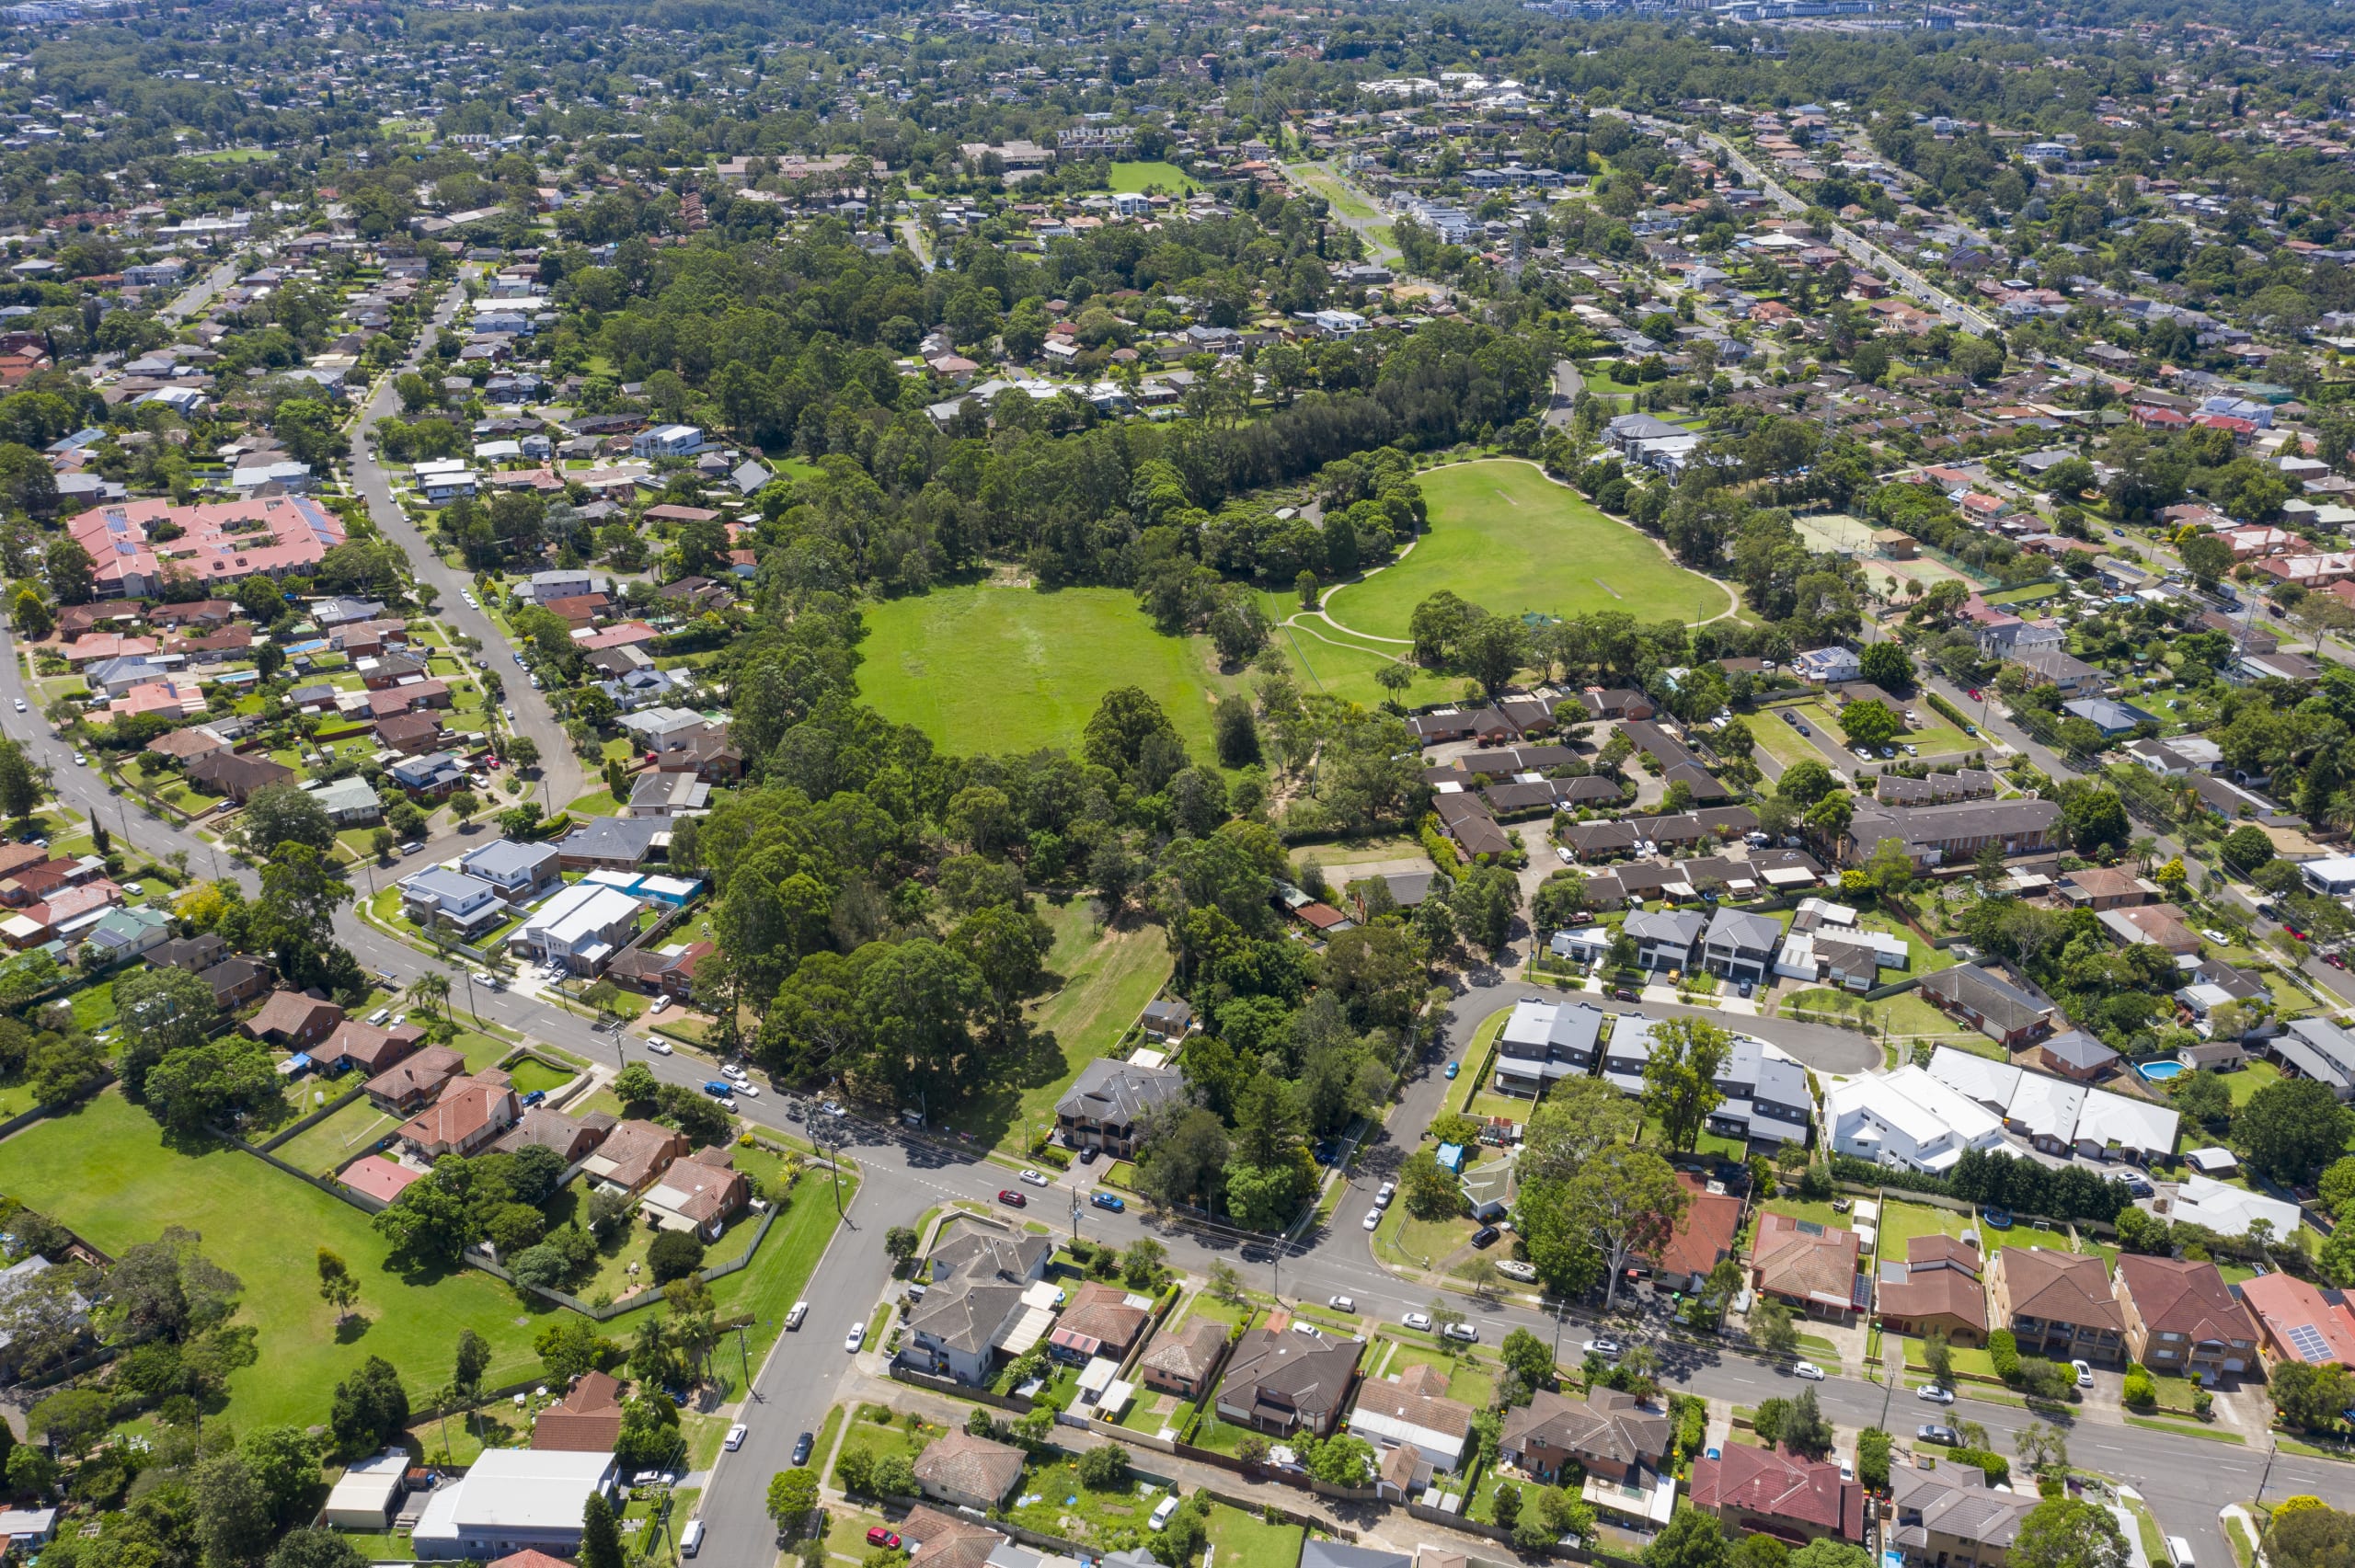 Aerial view of houses, streets and parks in the Sydney suburb of Ermington